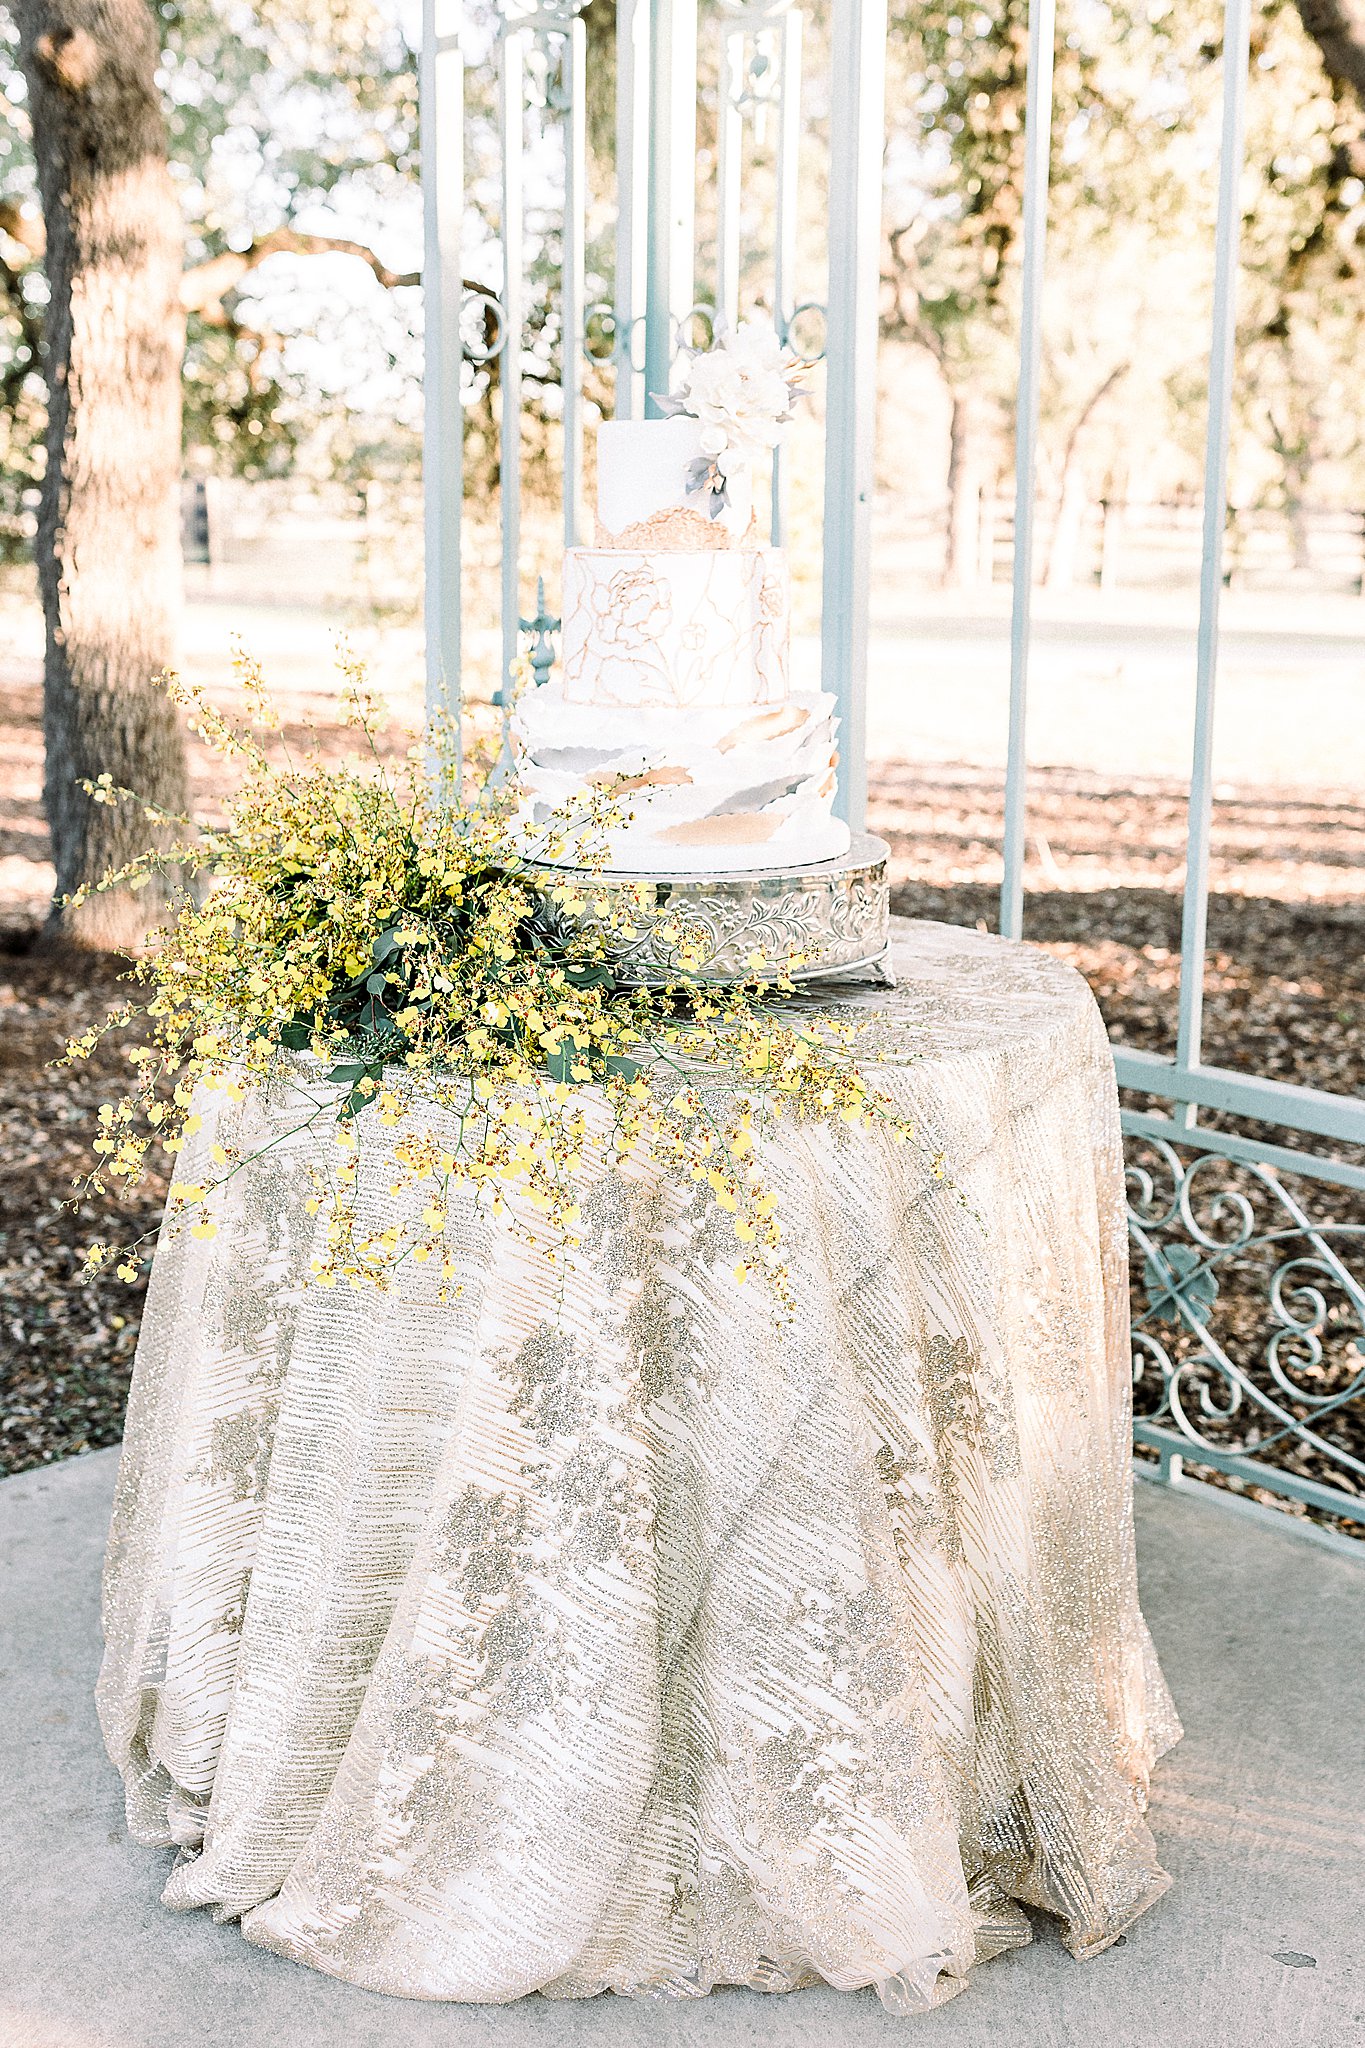 Cake table inspiration rose gold, silver, and yellow florals